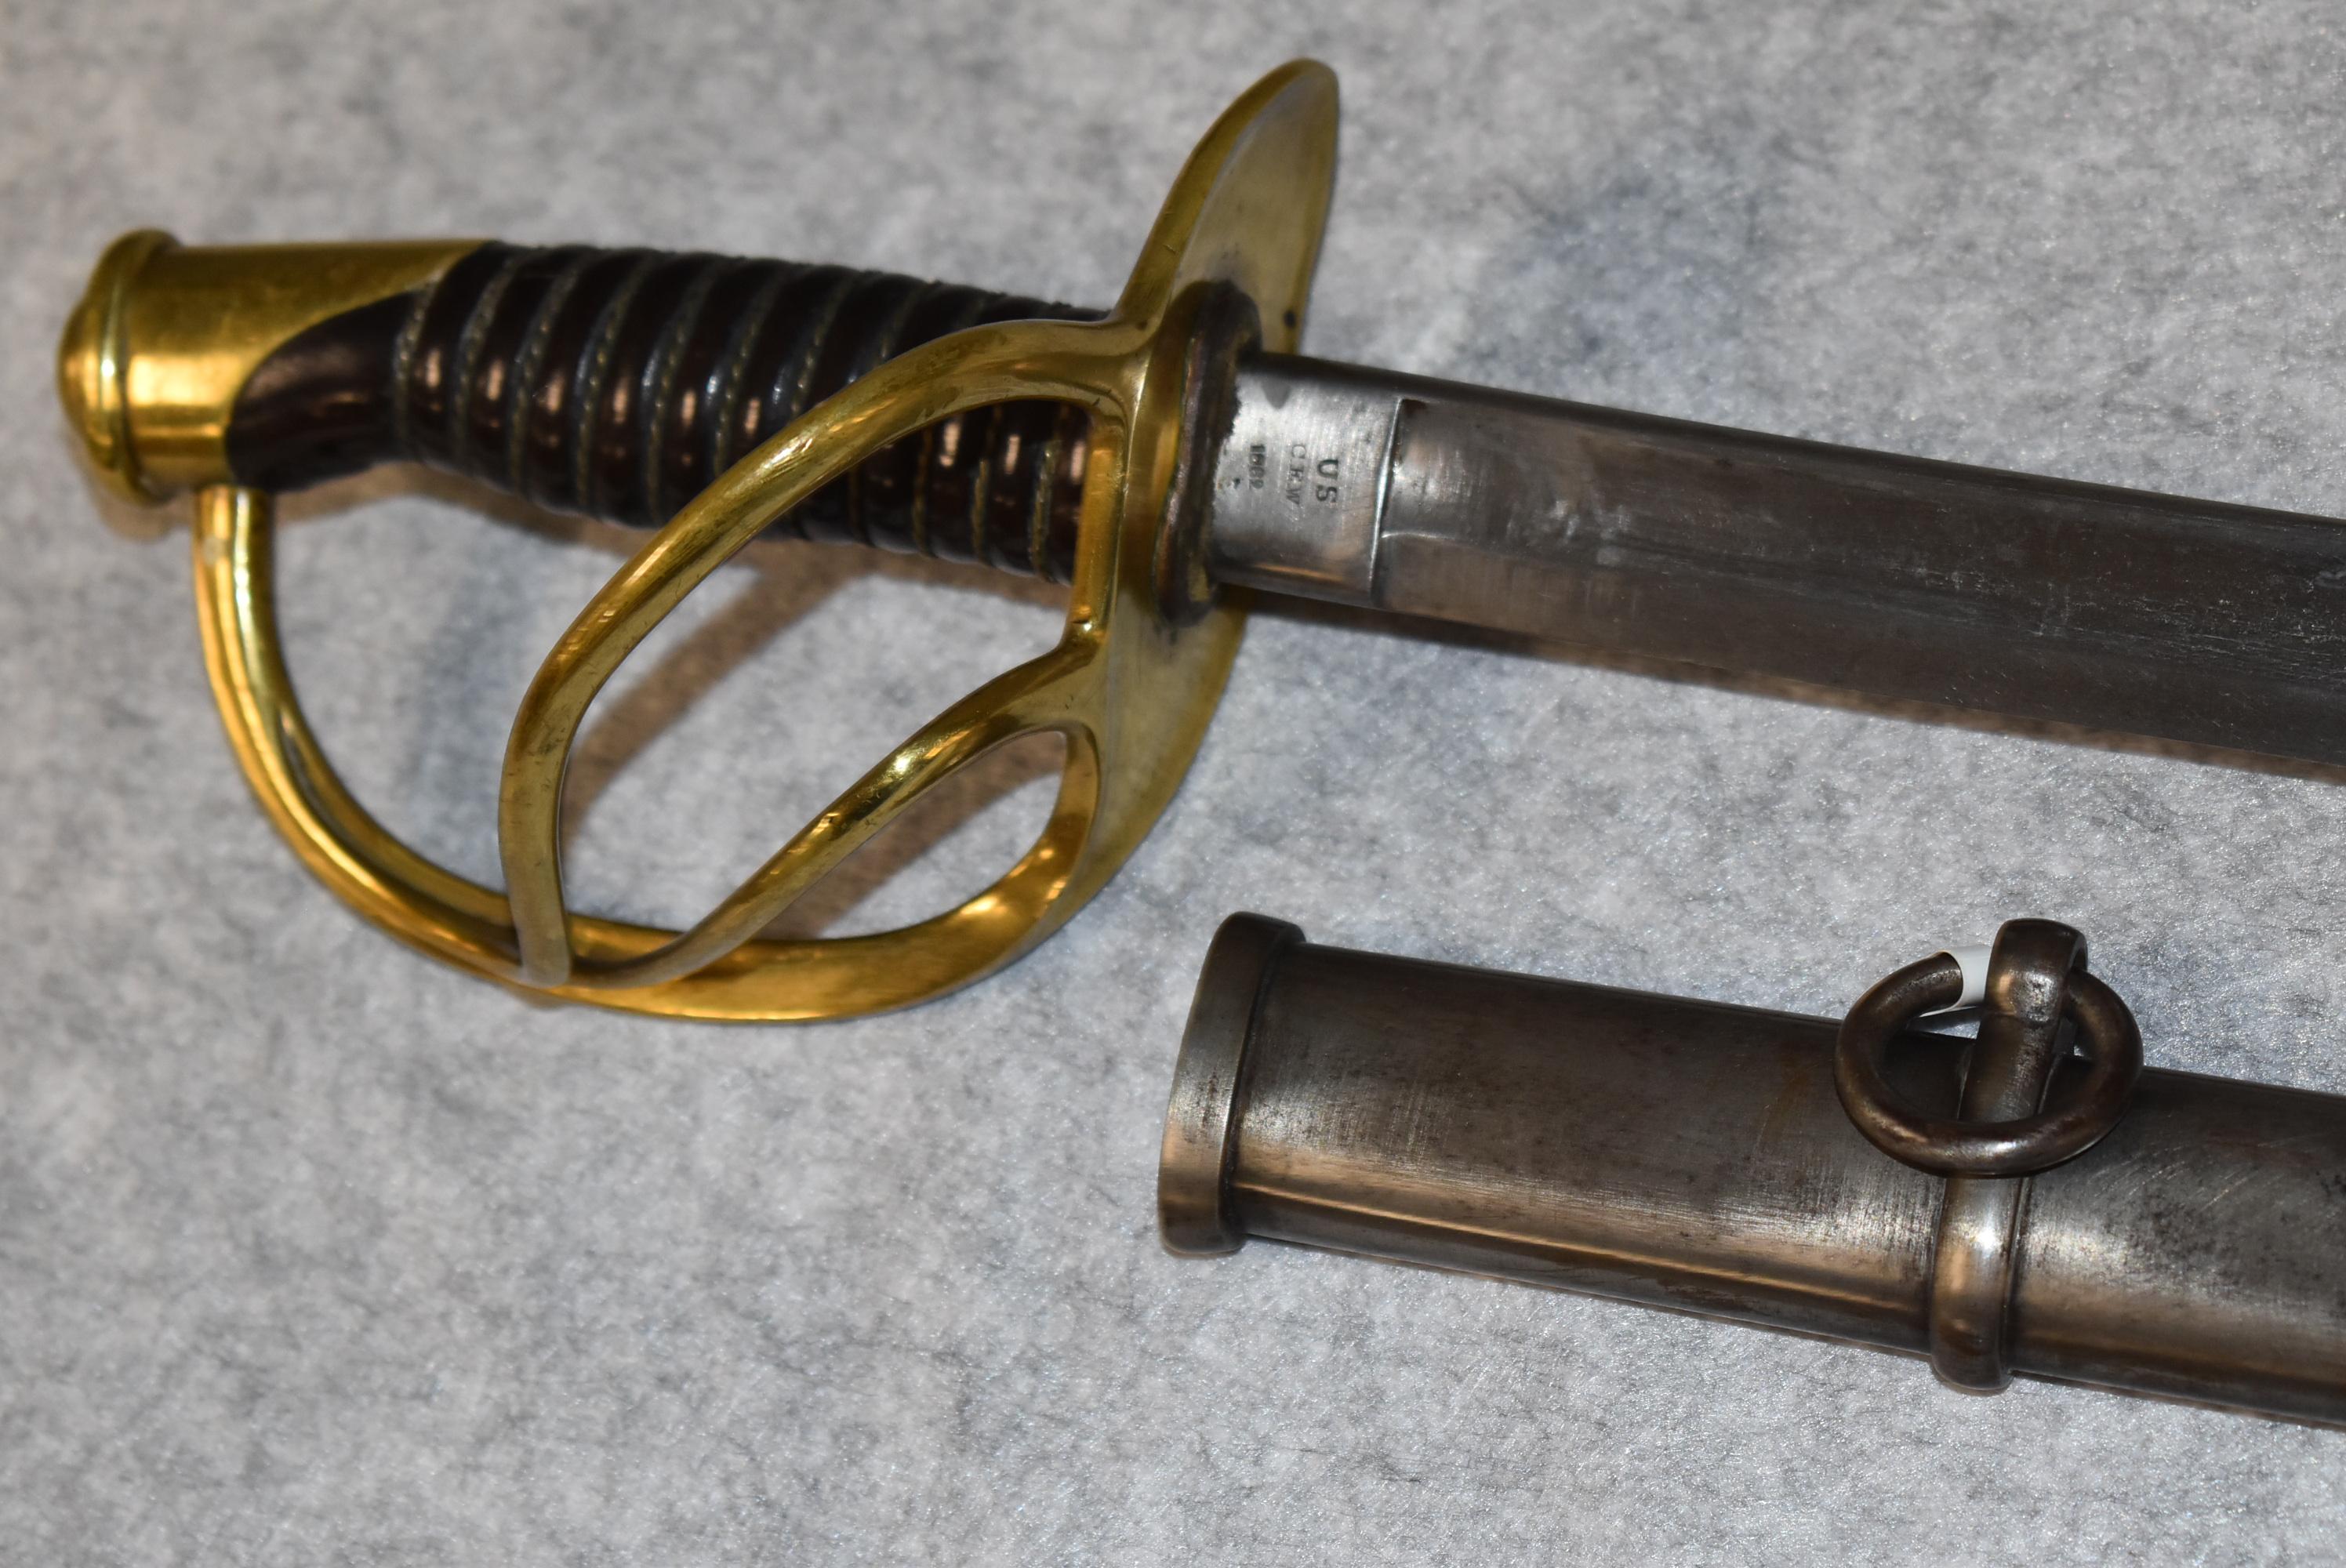 M1860 Cavalry saber and scabbard